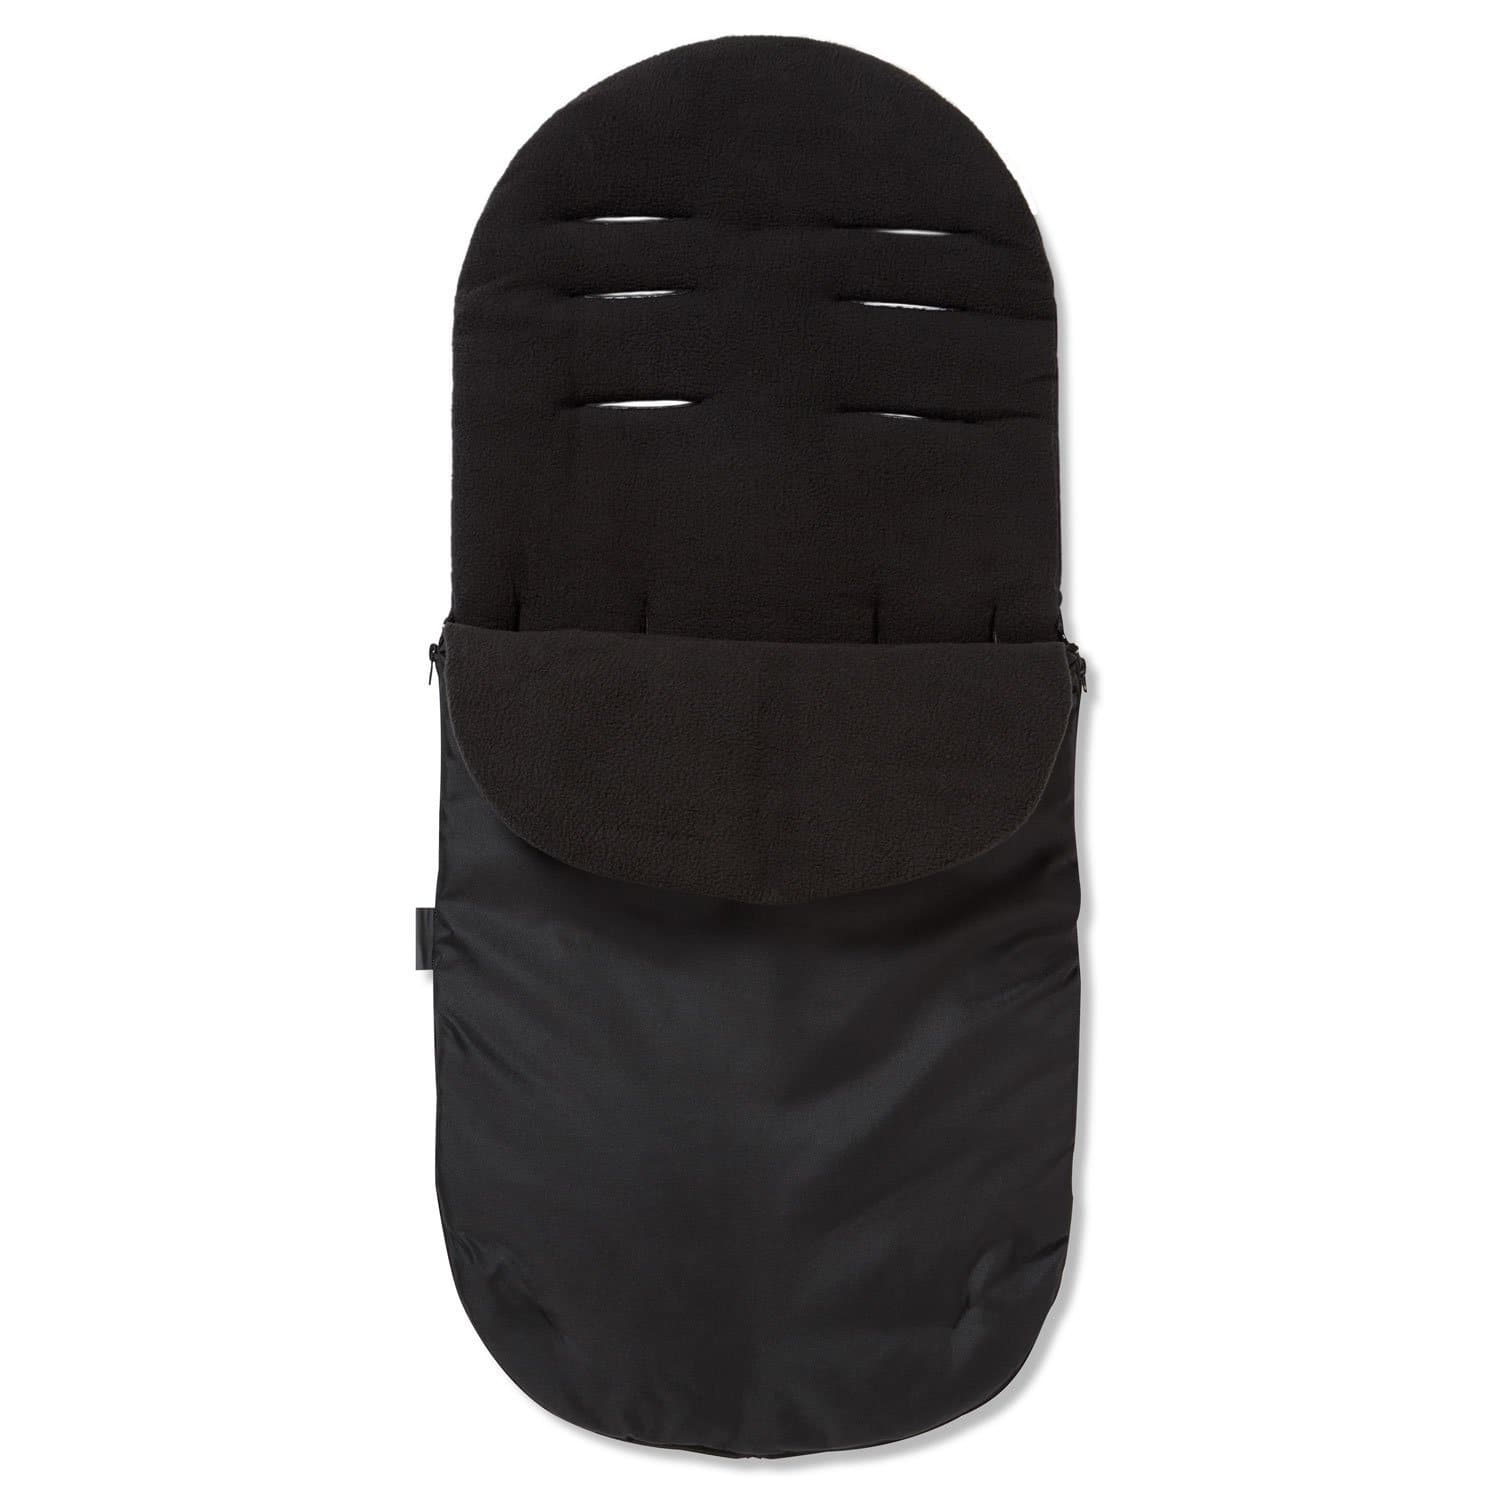 Footmuff / Cosy Toes Compatible with Brio - Black / Fits All Models | For Your Little One